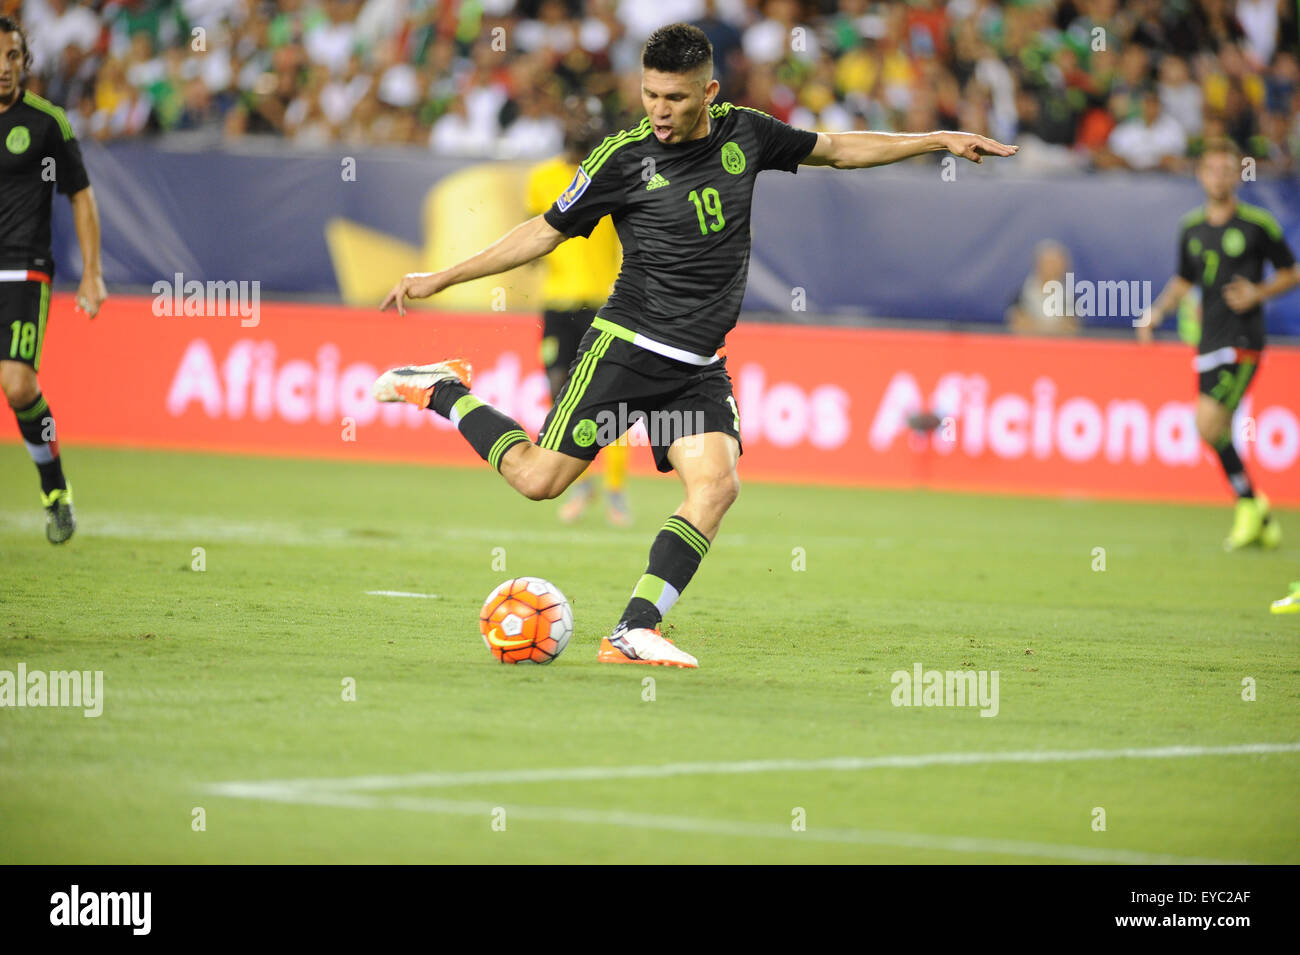 Philadelphia, Pennsylvania, USA. 26th July, 2015. Mexico player, ORIBE PERALTA (19) in action during the Gold Cup championship game The Gold Cup match played at Lincoln Financial Field in Philadelphia Pa (Credit Image: © Ricky Fitchett via ZUMA Wire) Stock Photo